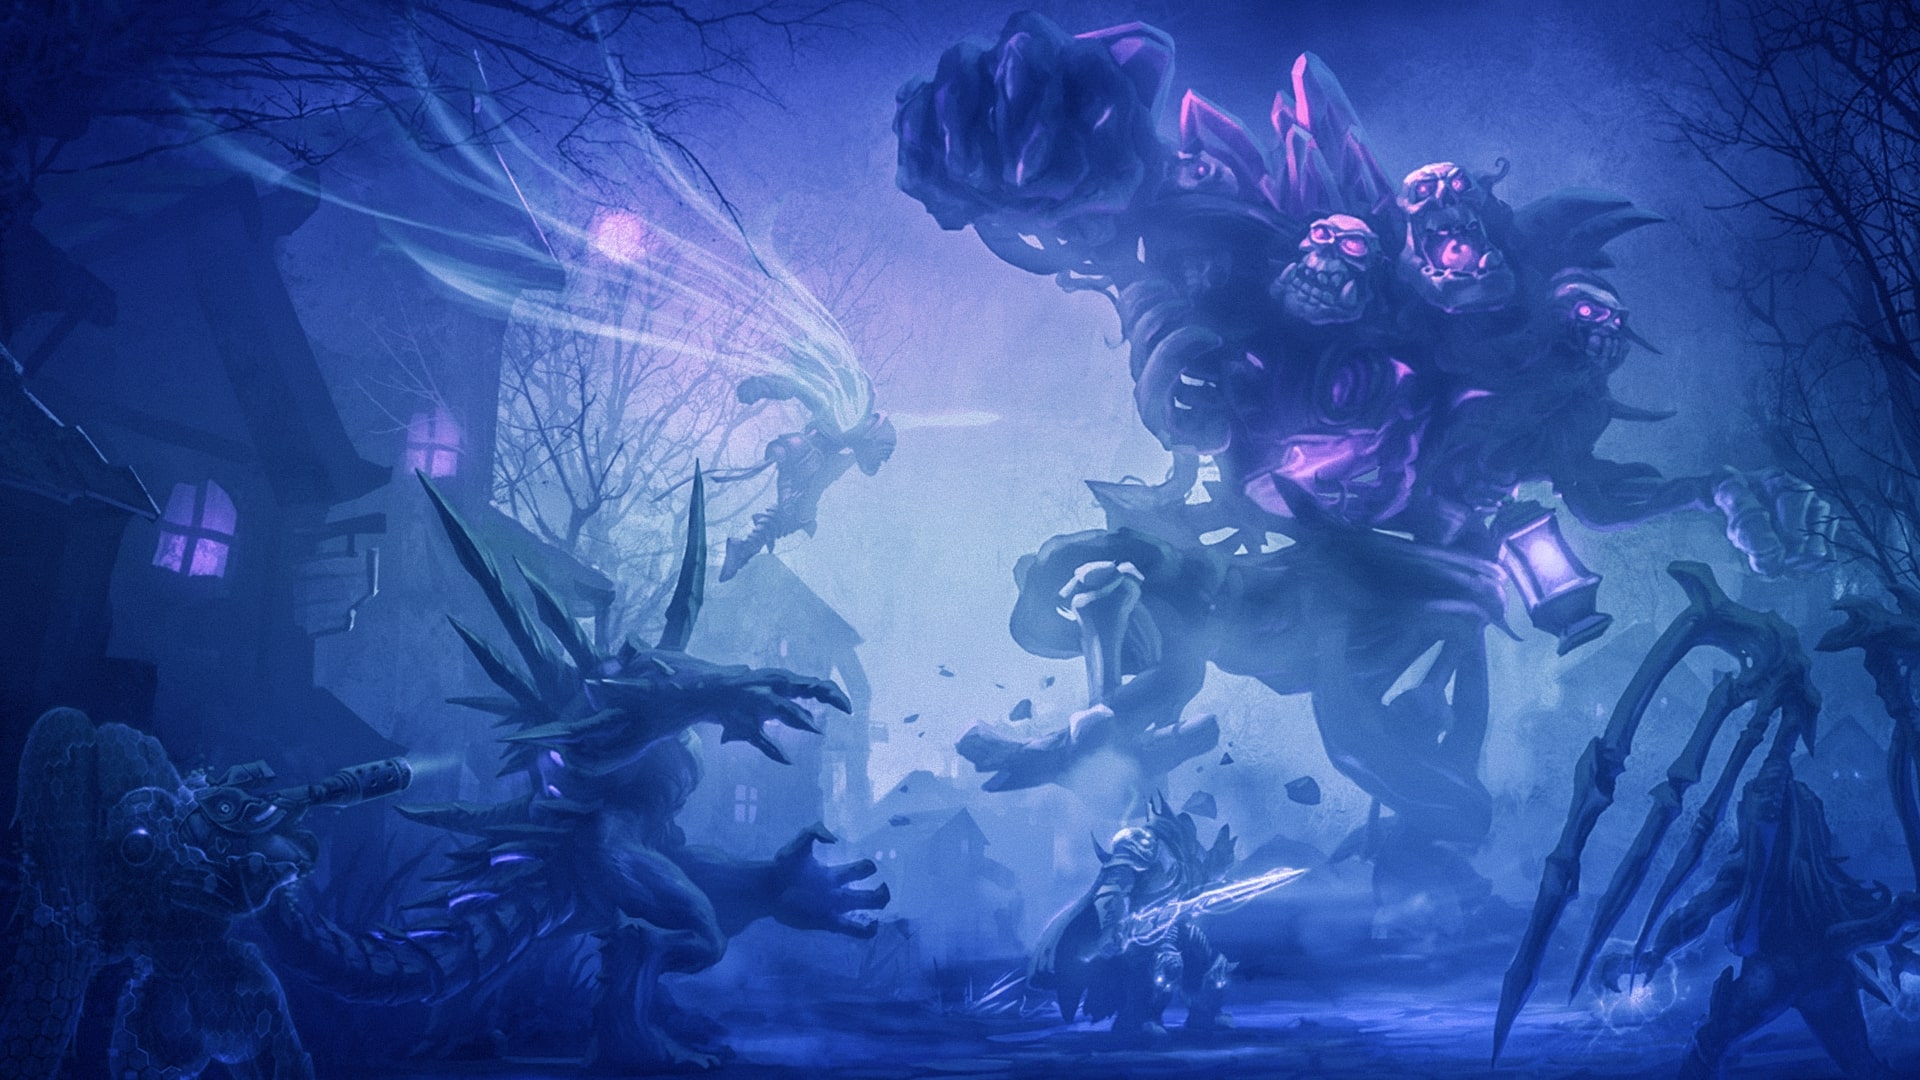 Take a Look at Heroes of the Storm's Next Map and Hero - GameSpot